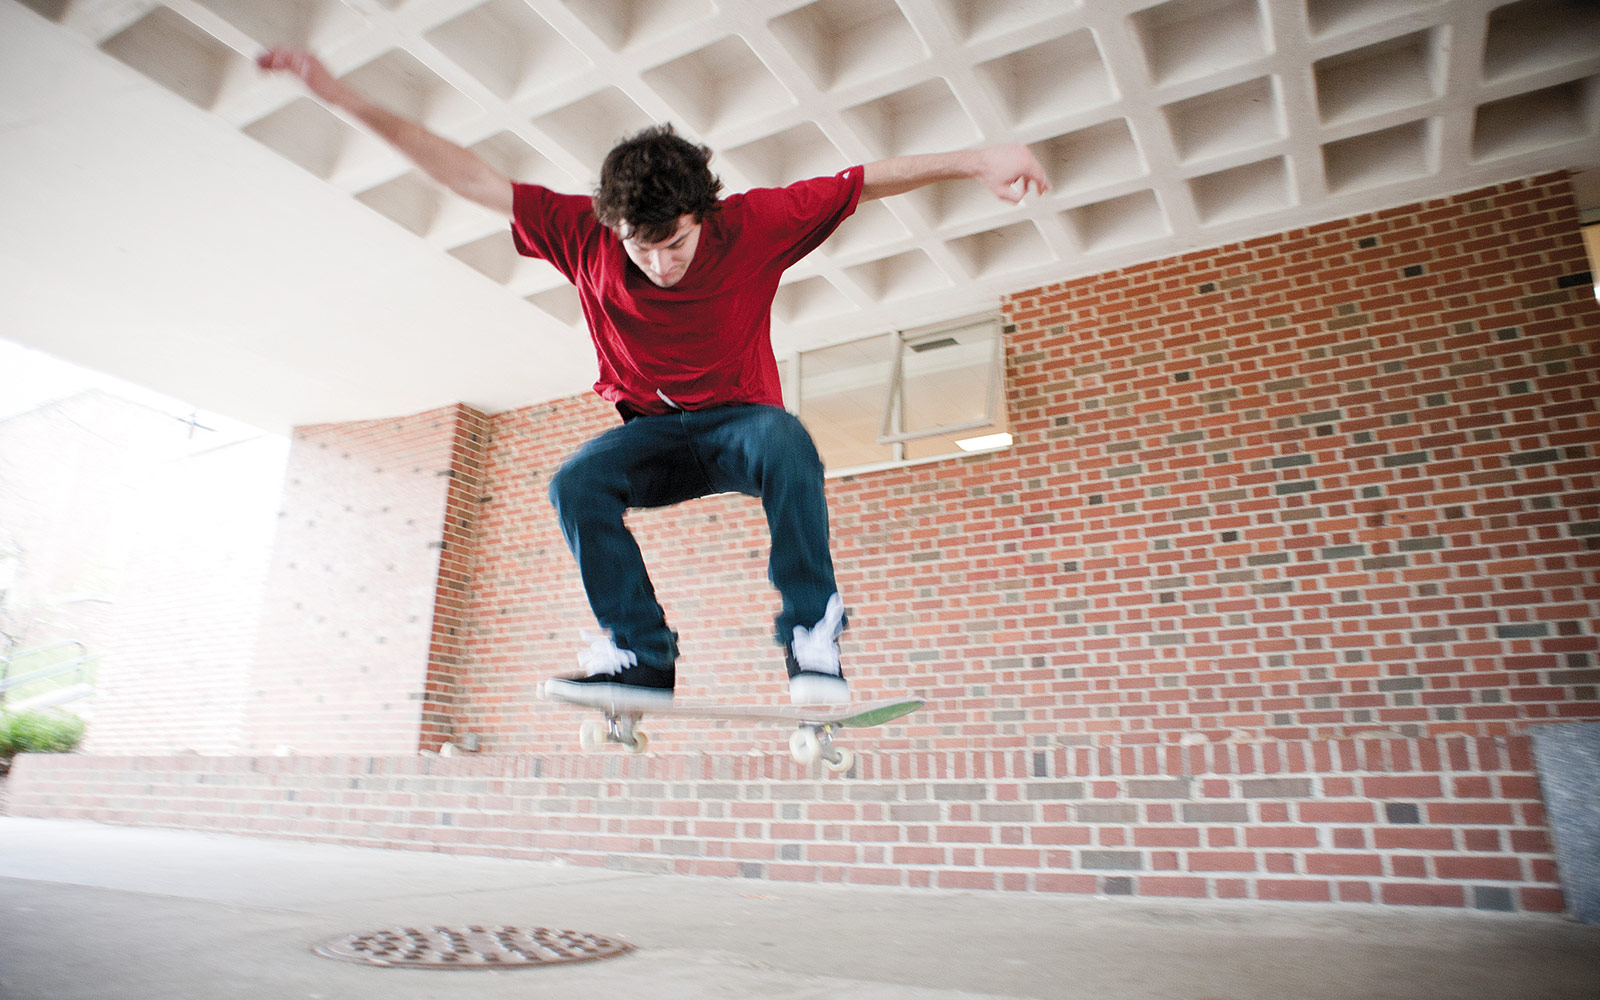 We were going into the dining hall to talk photographs when we saw this skateboarder. I must have taken more than 100 pictures of him doing this stunt over and over and over again. I think I said, "One more time! One more time!" about 12 ti…